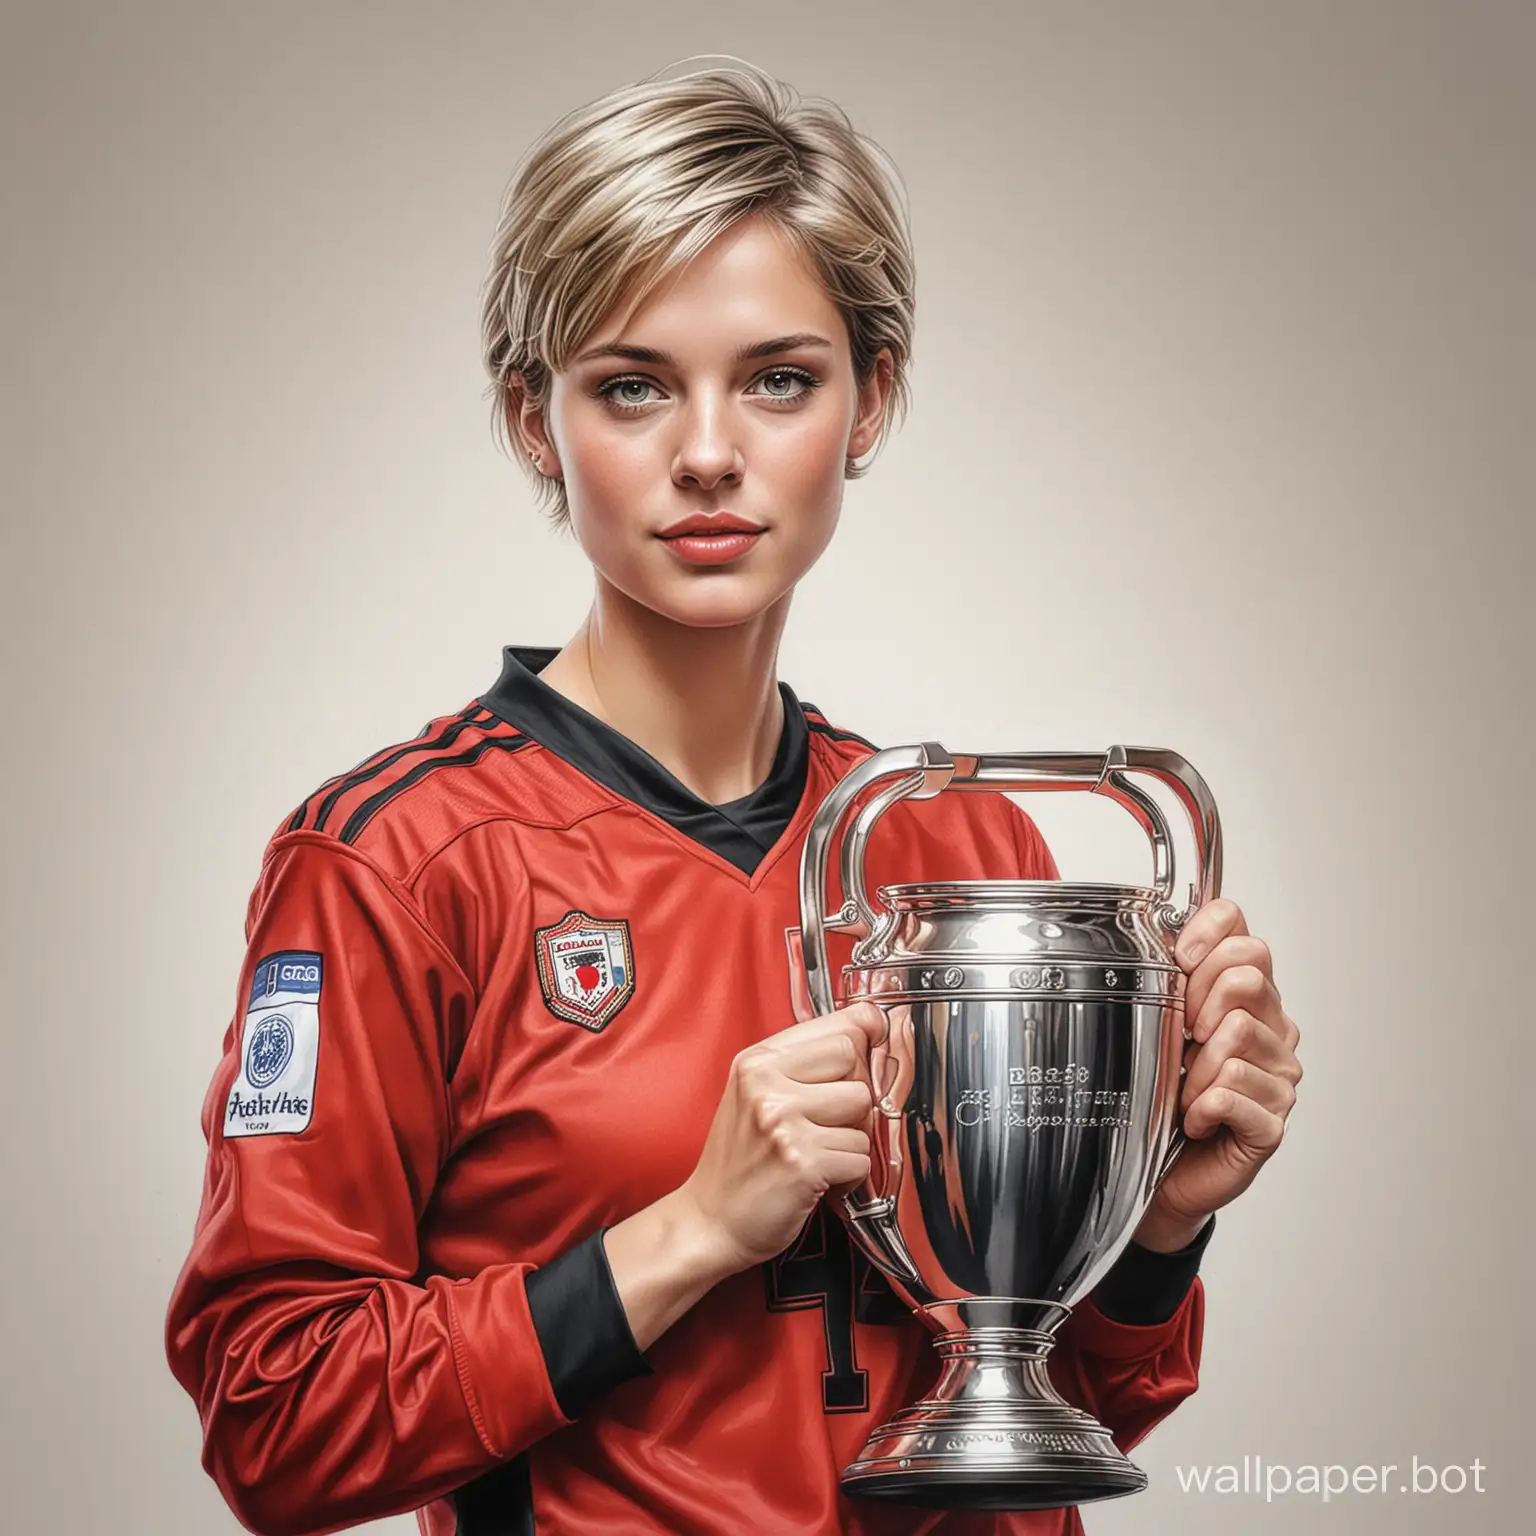 Young-Diana-de-Bussy-Wins-Football-Championship-Cup-in-Red-and-Black-Uniform